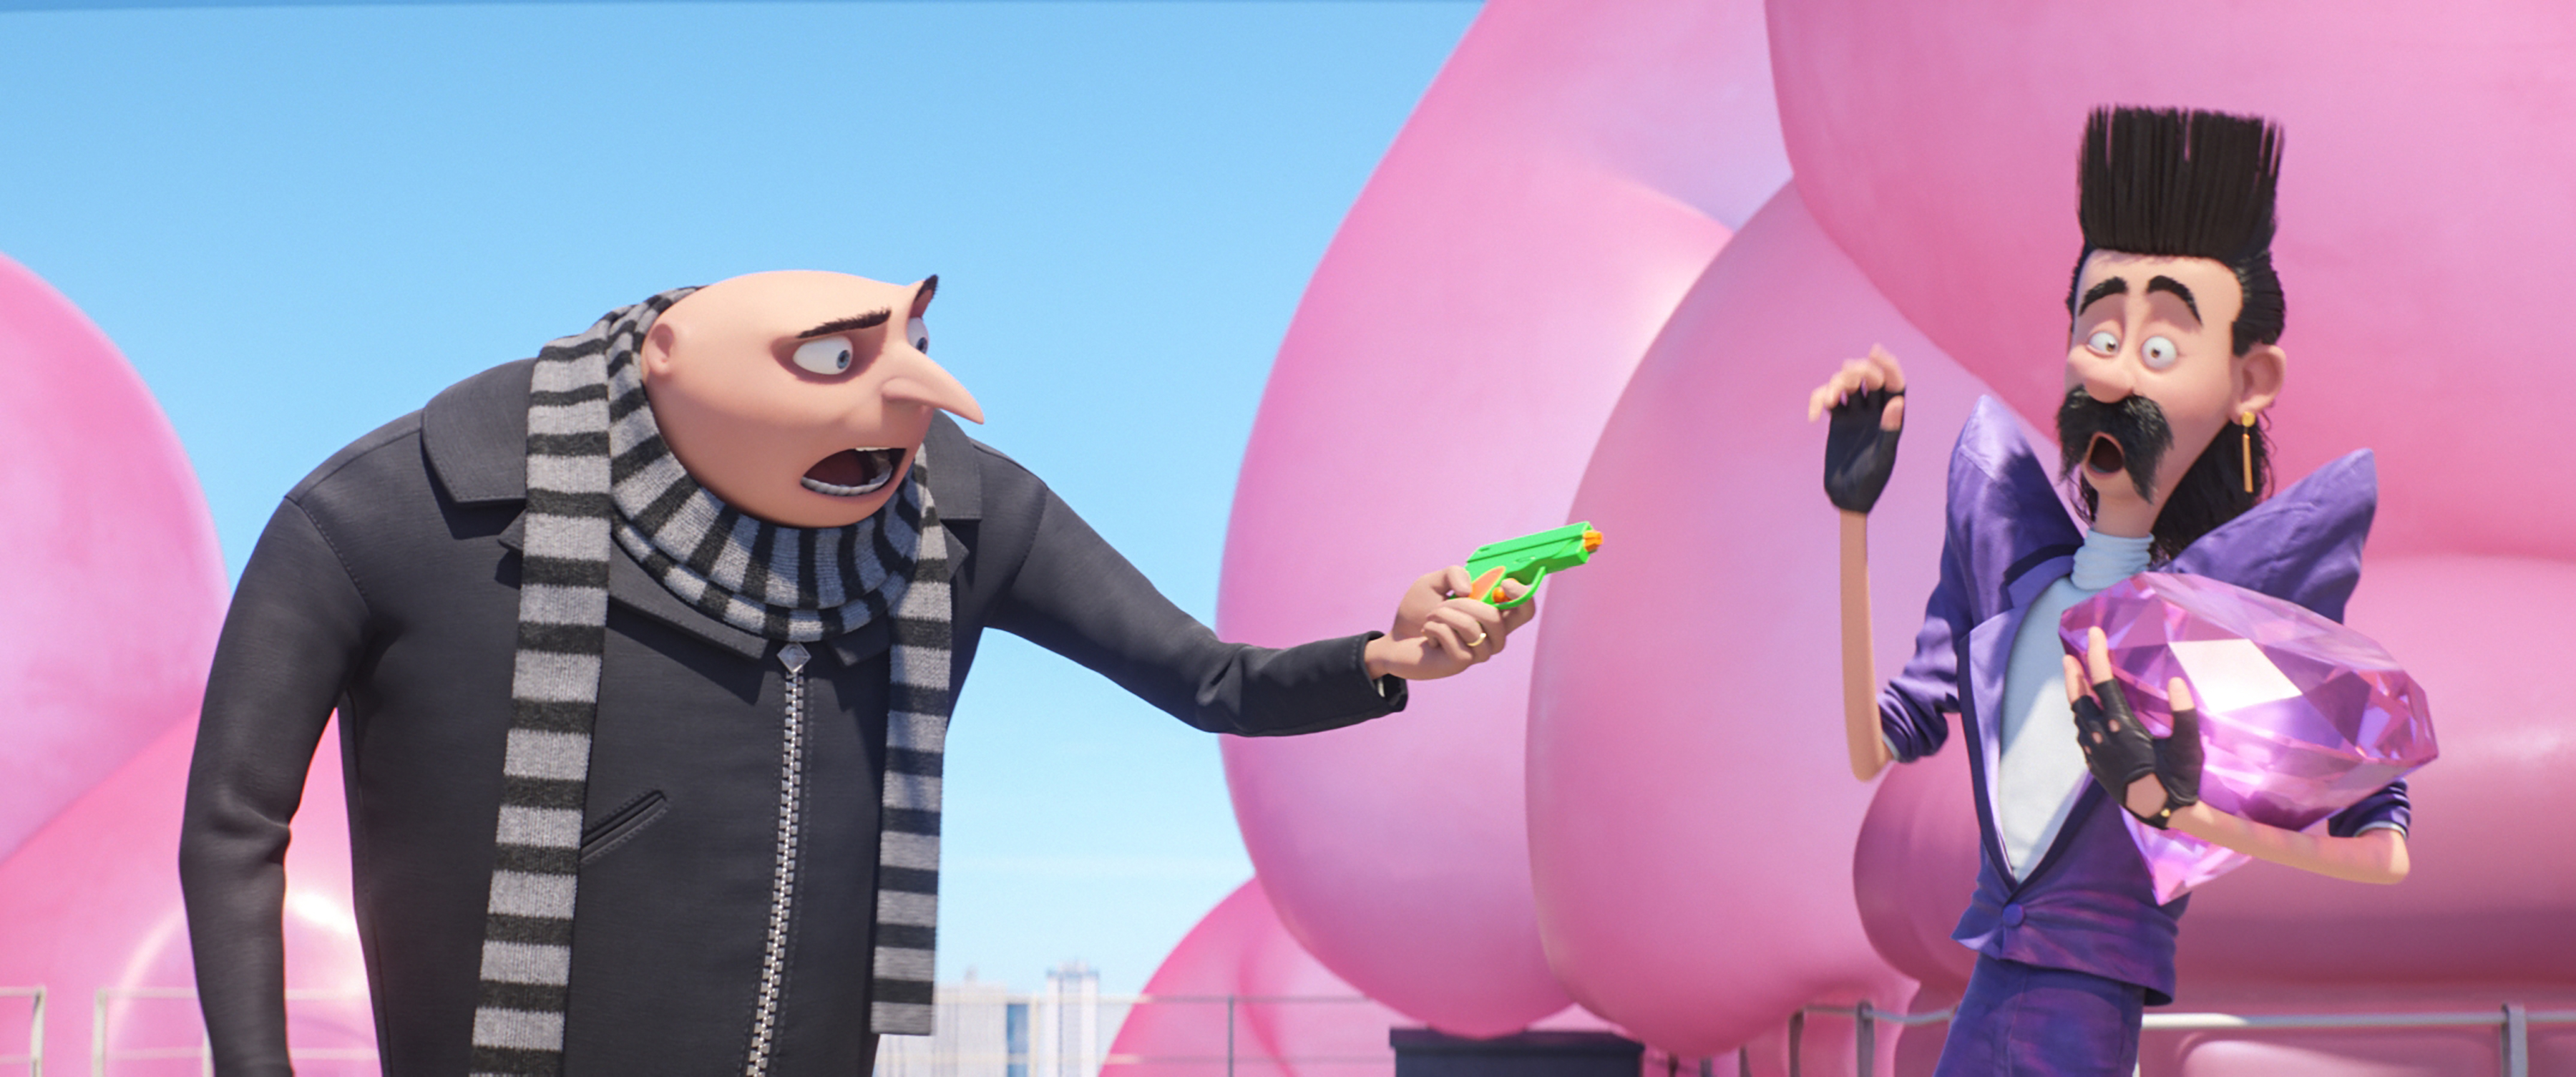 Two stars: 'Despicable Me 3' plays it too safe, Logan Hj